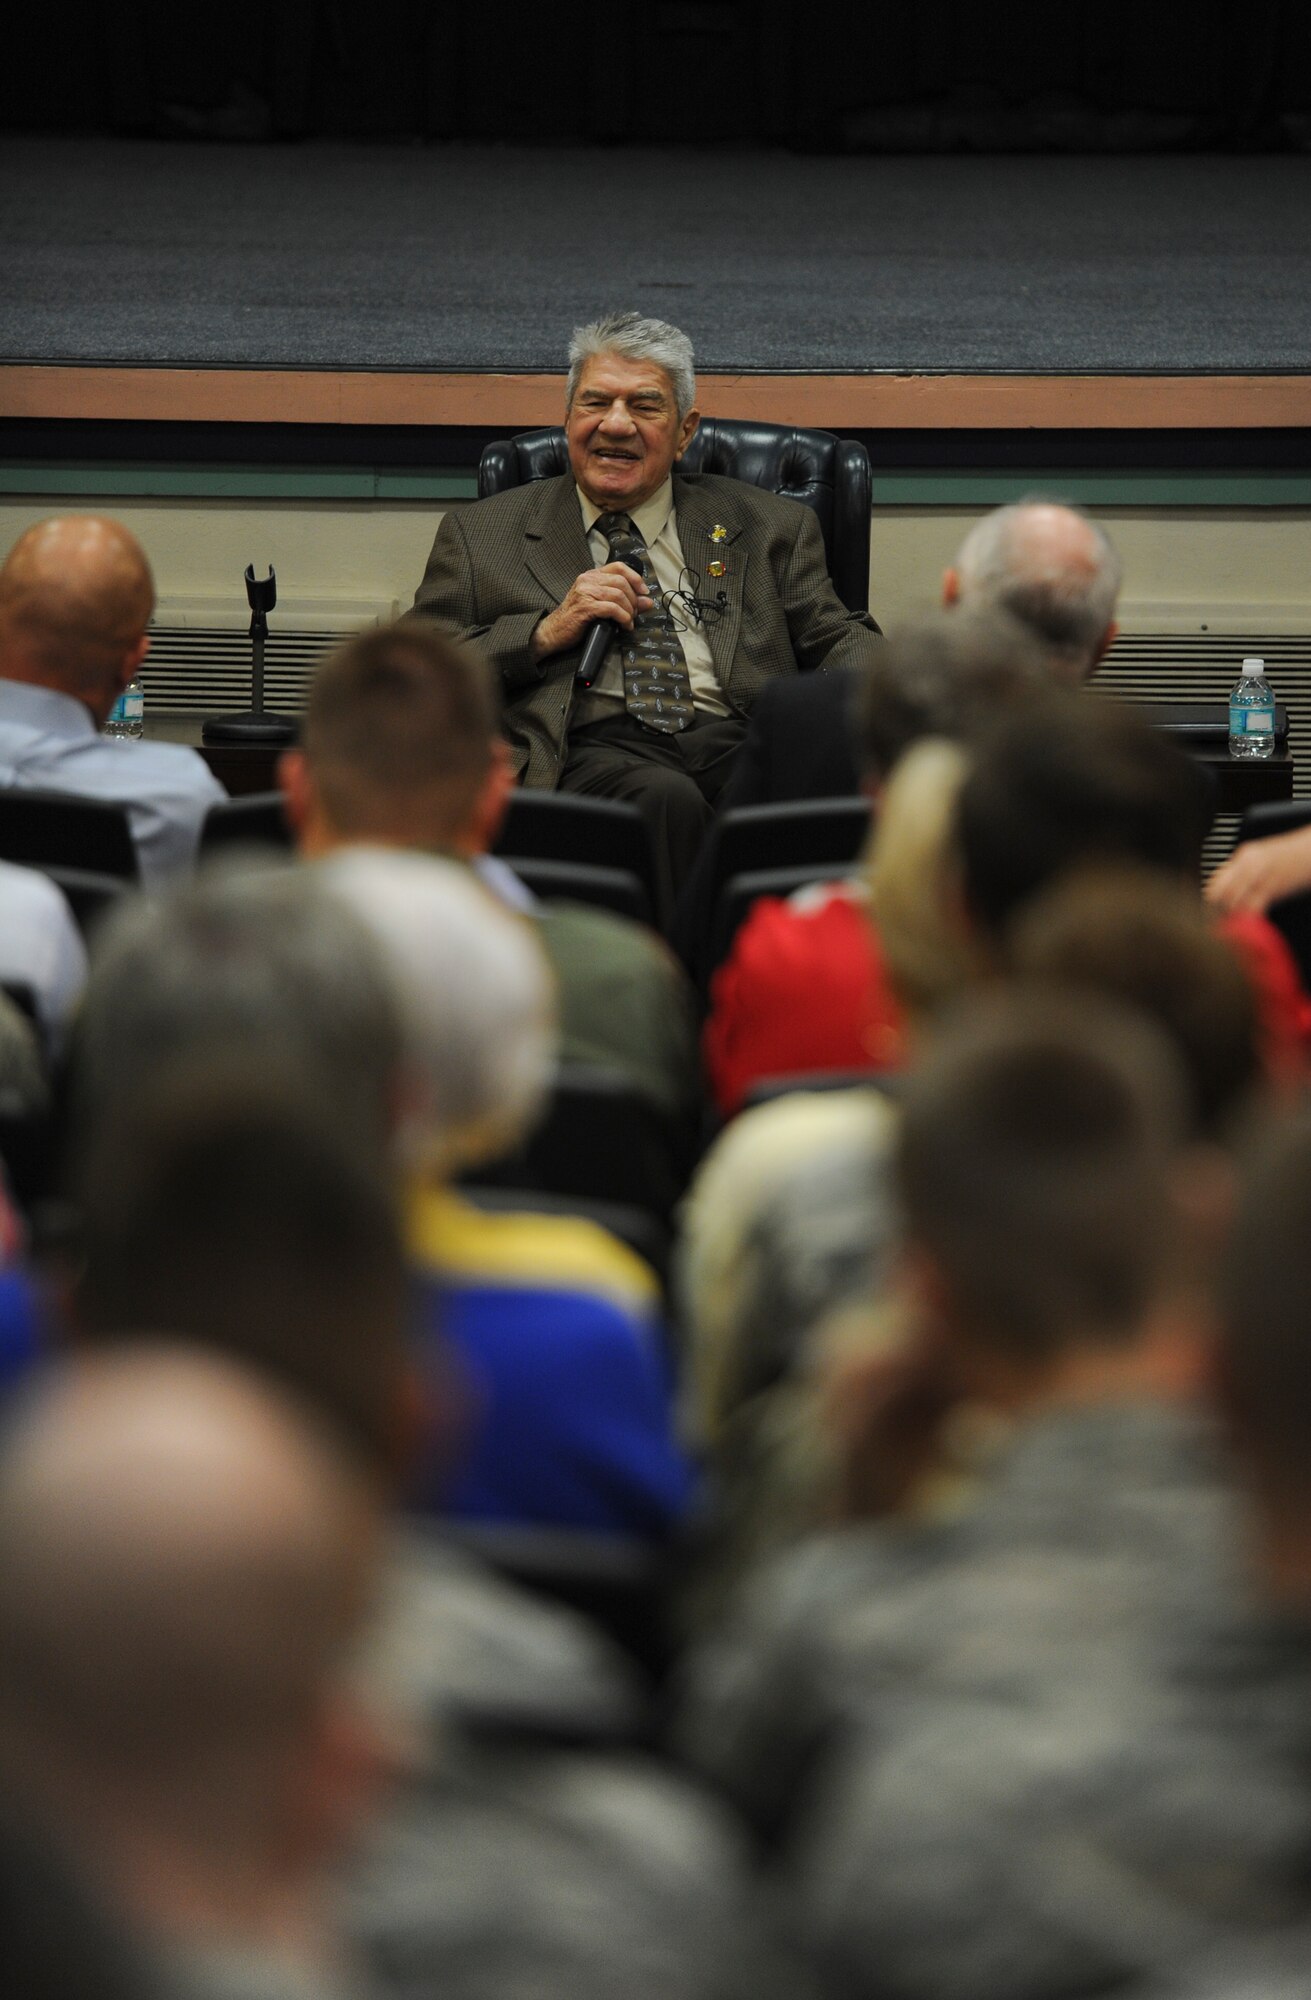 Retired Senior Master Sgt. Gaylord Hall speaks with a crowd during a ceremony on Hurlburt Field, Fla., June 6, 2014. Hall was an aircraft mechanic and part of the Flying Tigers during World War II. (U.S. Air Force photo/Senior Airman Christopher Callaway) 